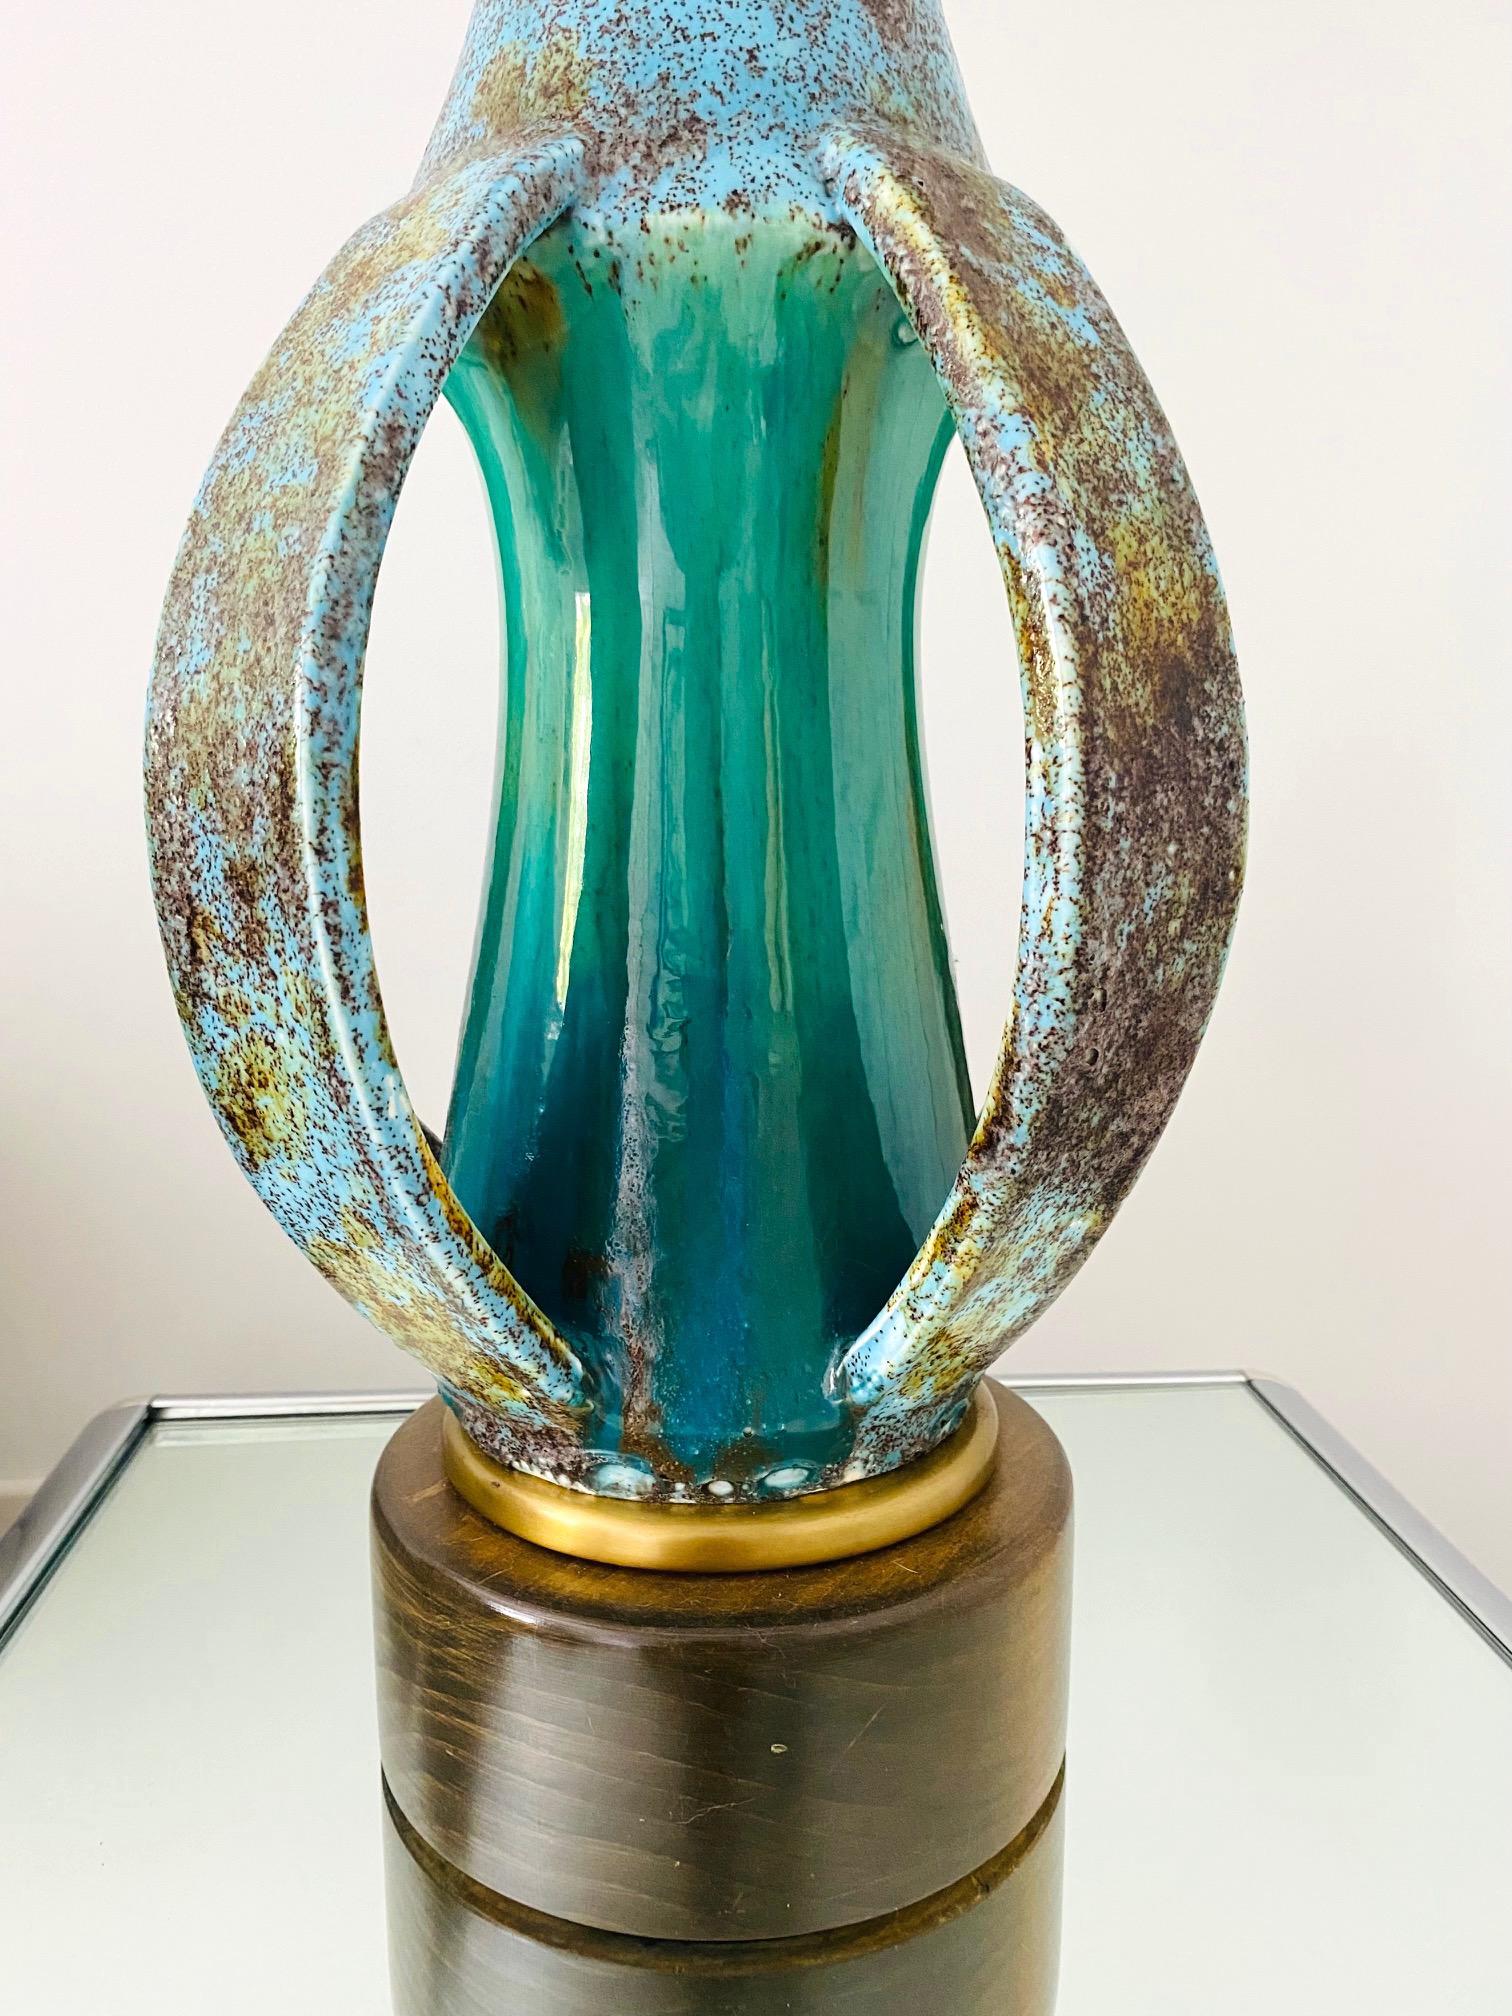 Mid-20th Century Mid-Century Modern Sculptural Pottery Lamp in Turquoise & Blue, Denmark C. 1960s For Sale